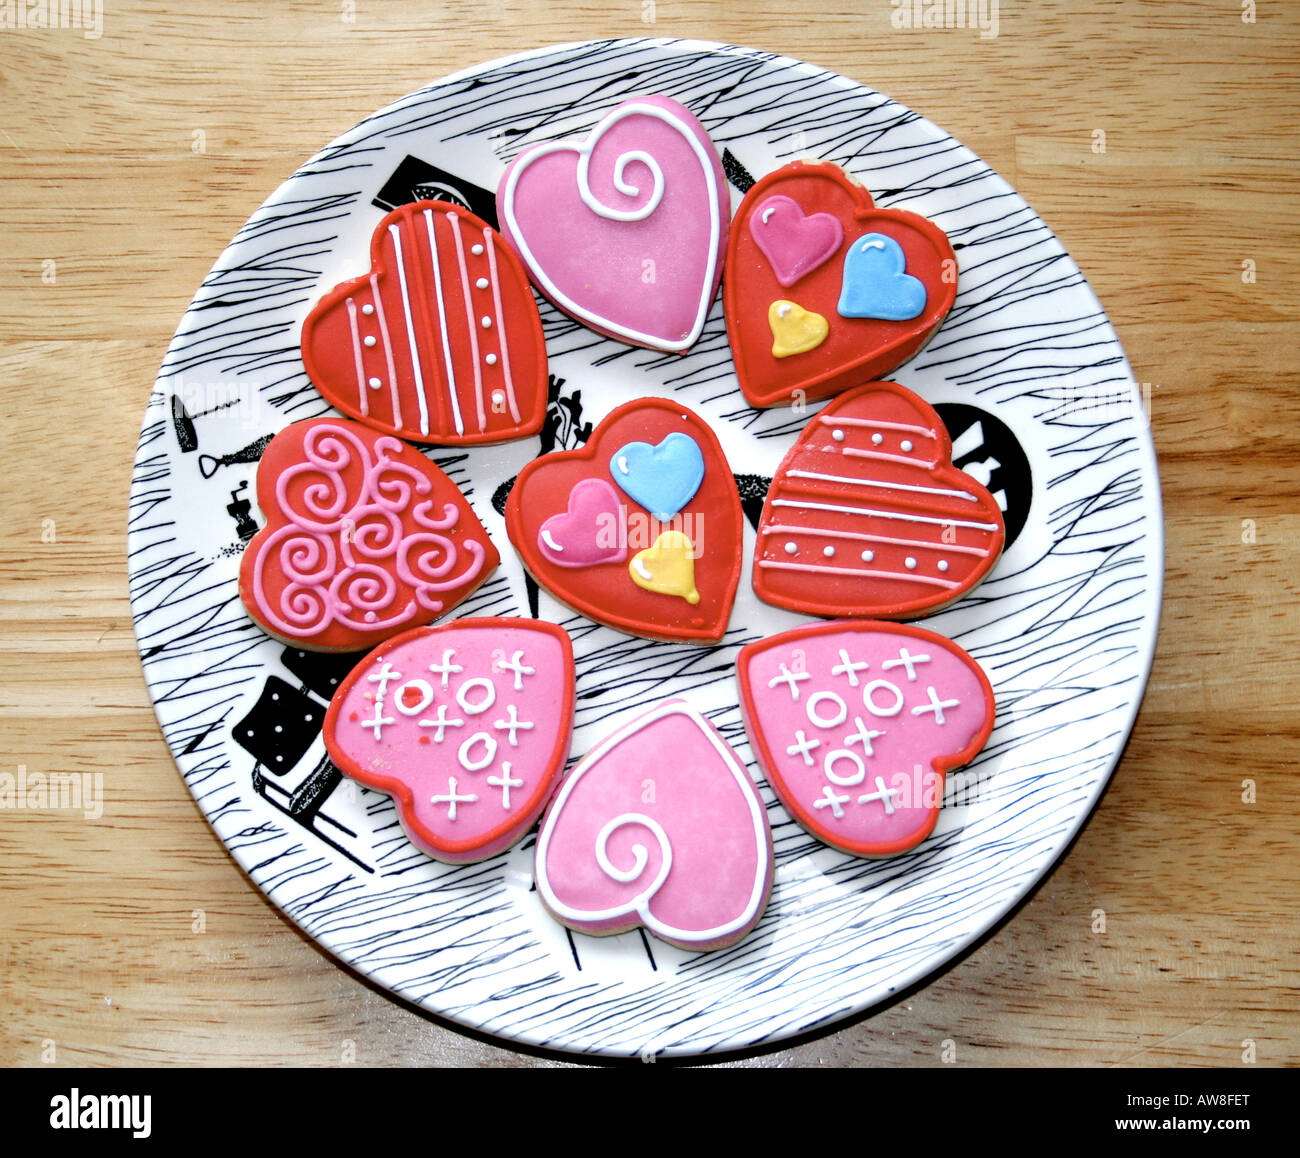 heart shaped biscuits Stock Photo